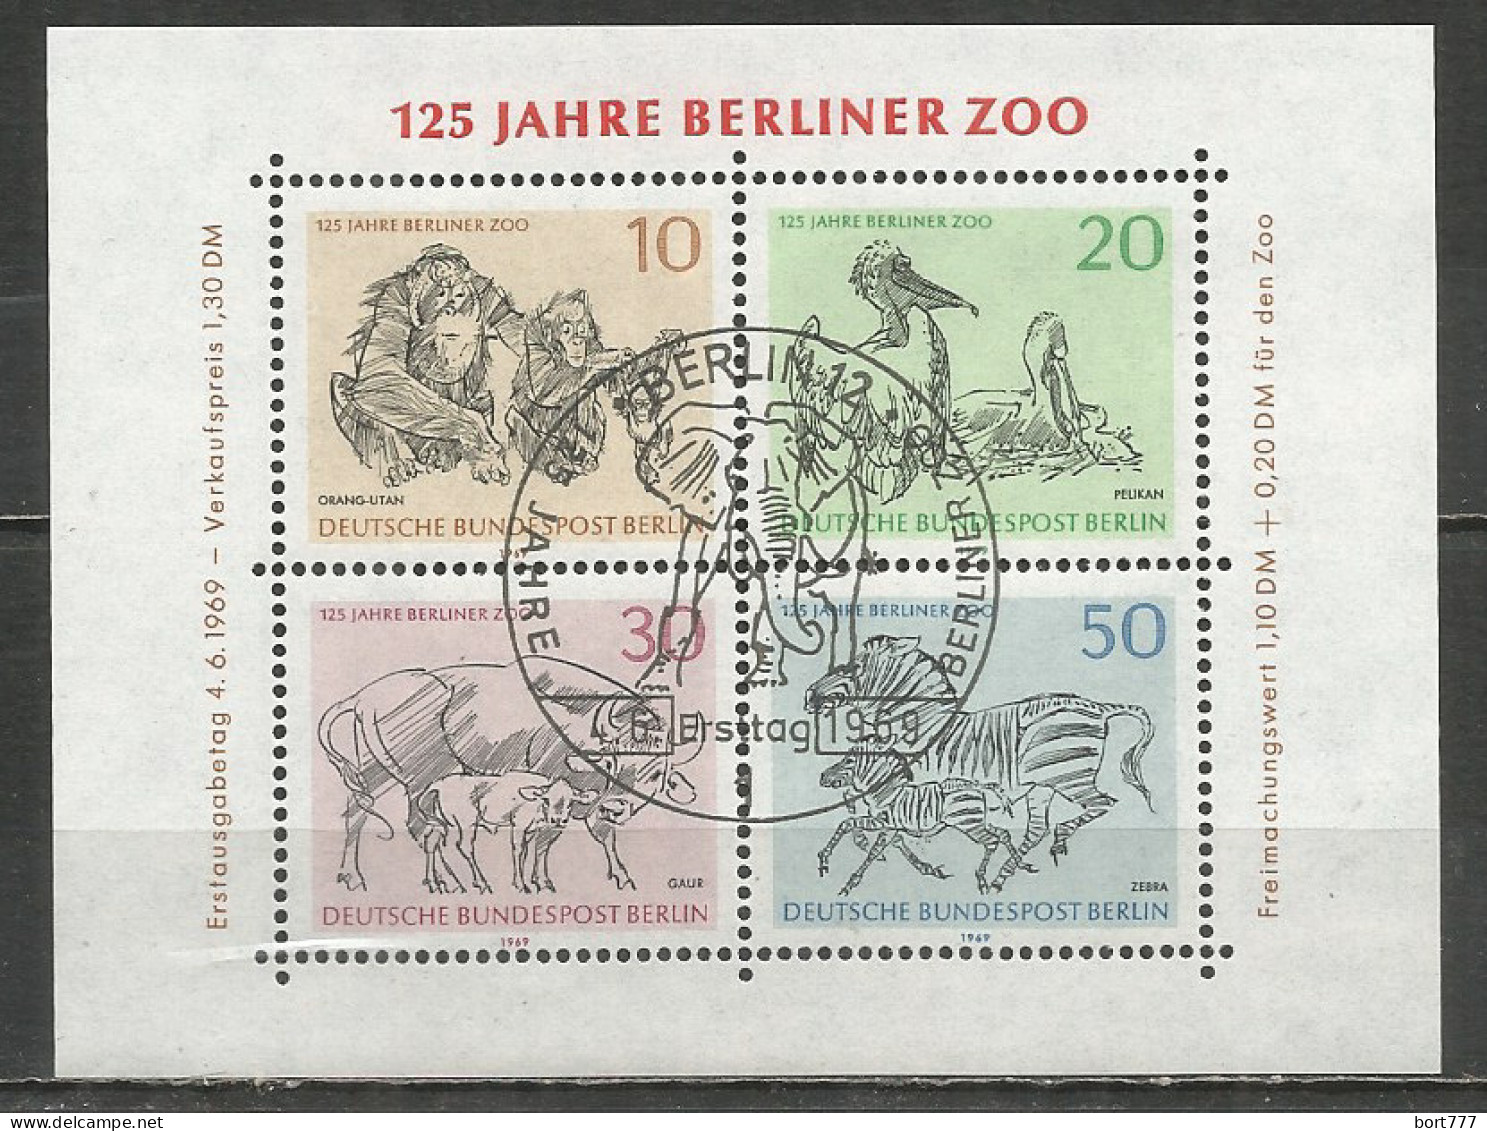 Germany Berlin 1969 Year. Used Block Mich.# Blc 2 - Used Stamps